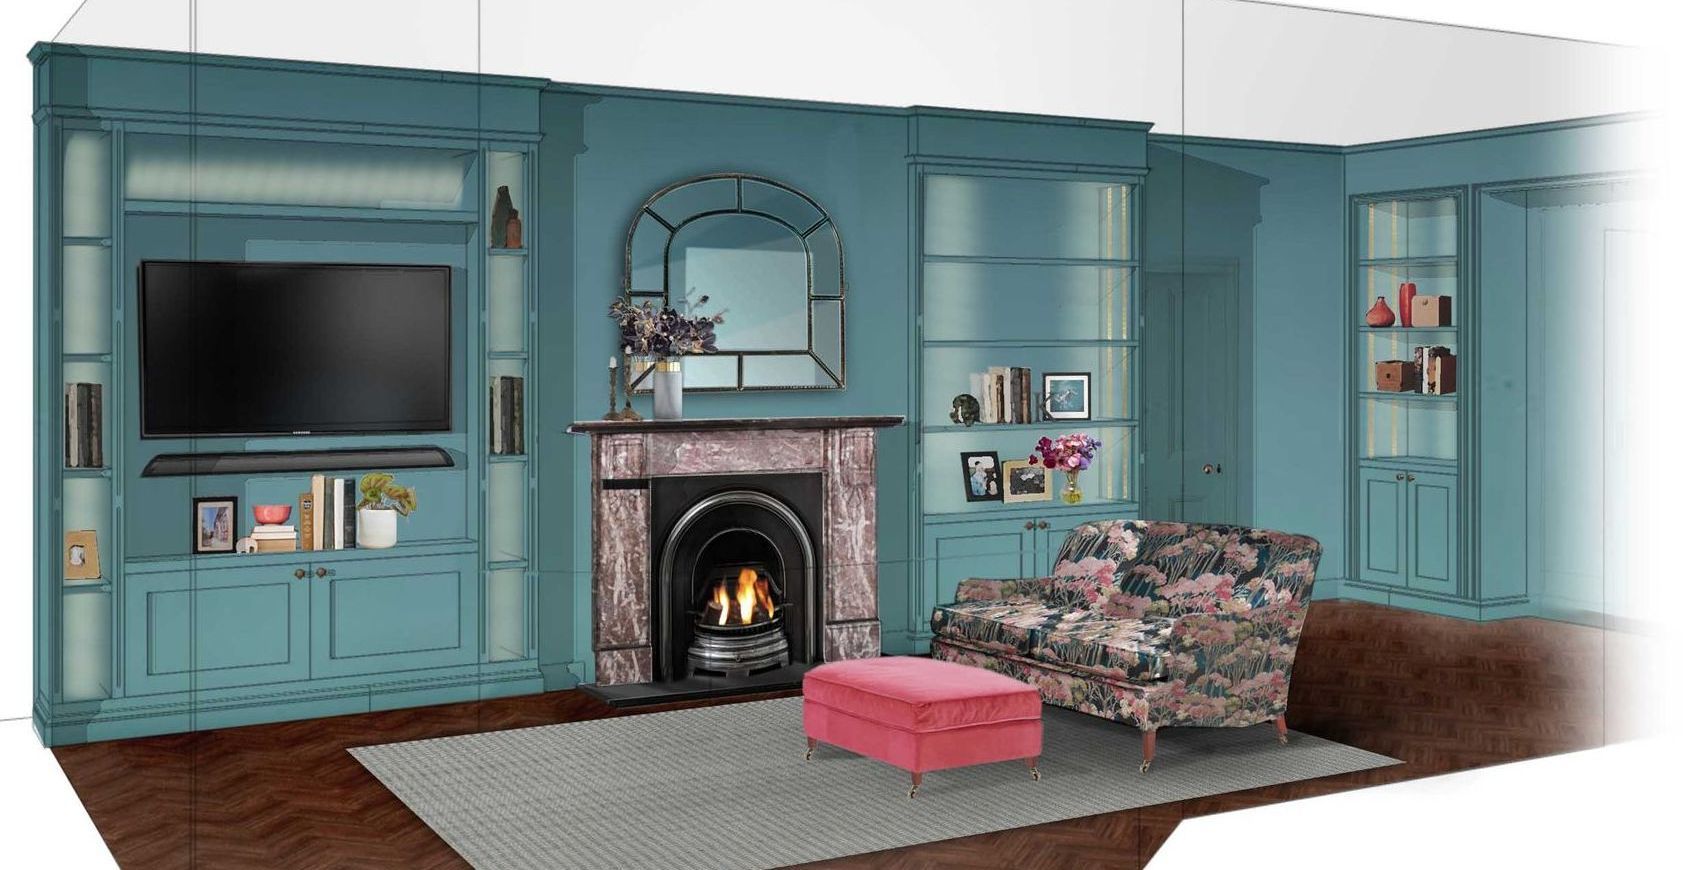 Mock up of teal and peach coloured lounge room – part of our interior design process.